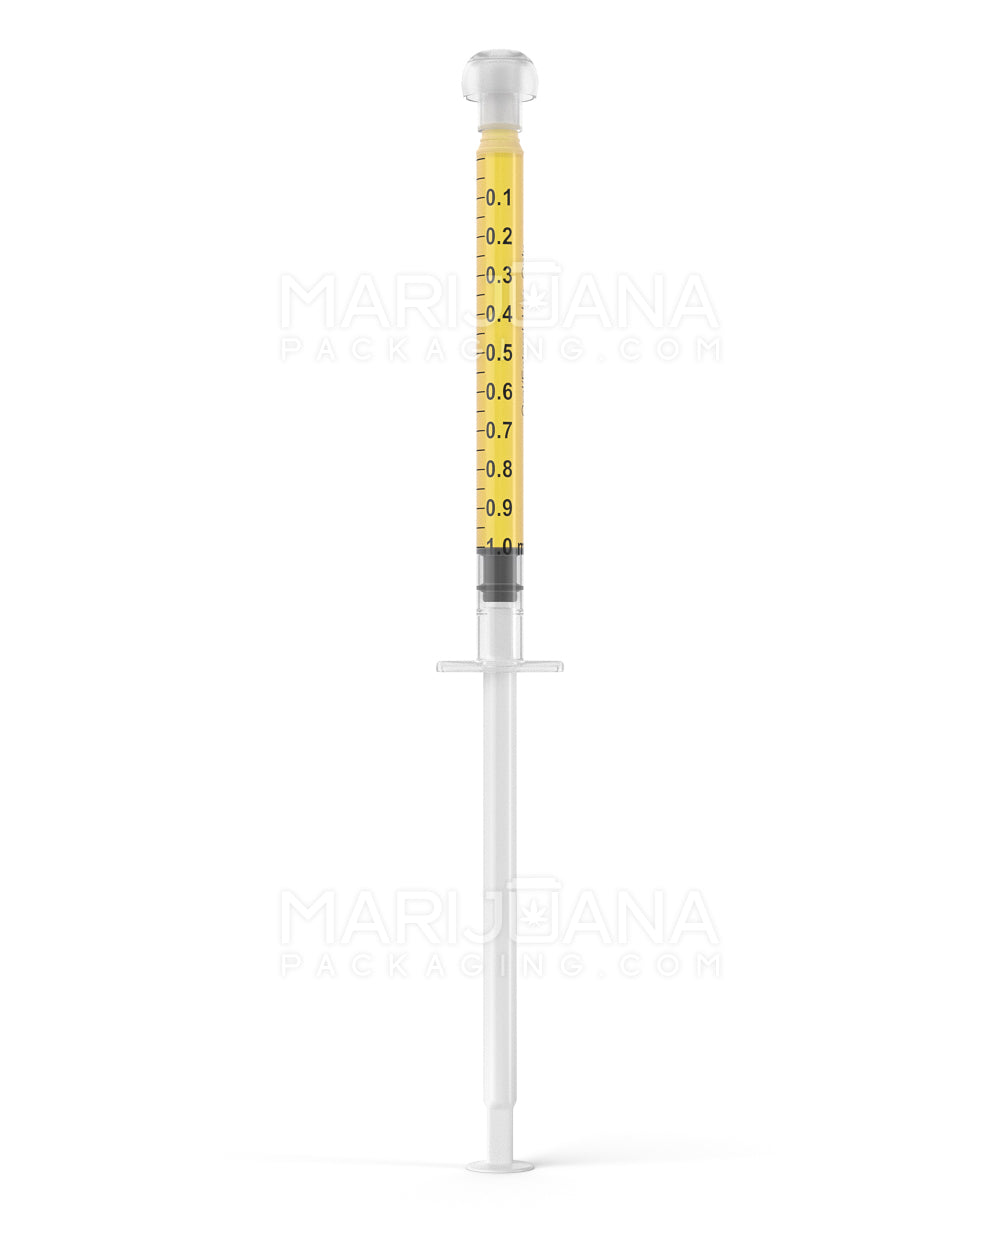 Plastic Oral Concentrate Syringes | 1mL - 0.1mL Increments - 100 Count - 2